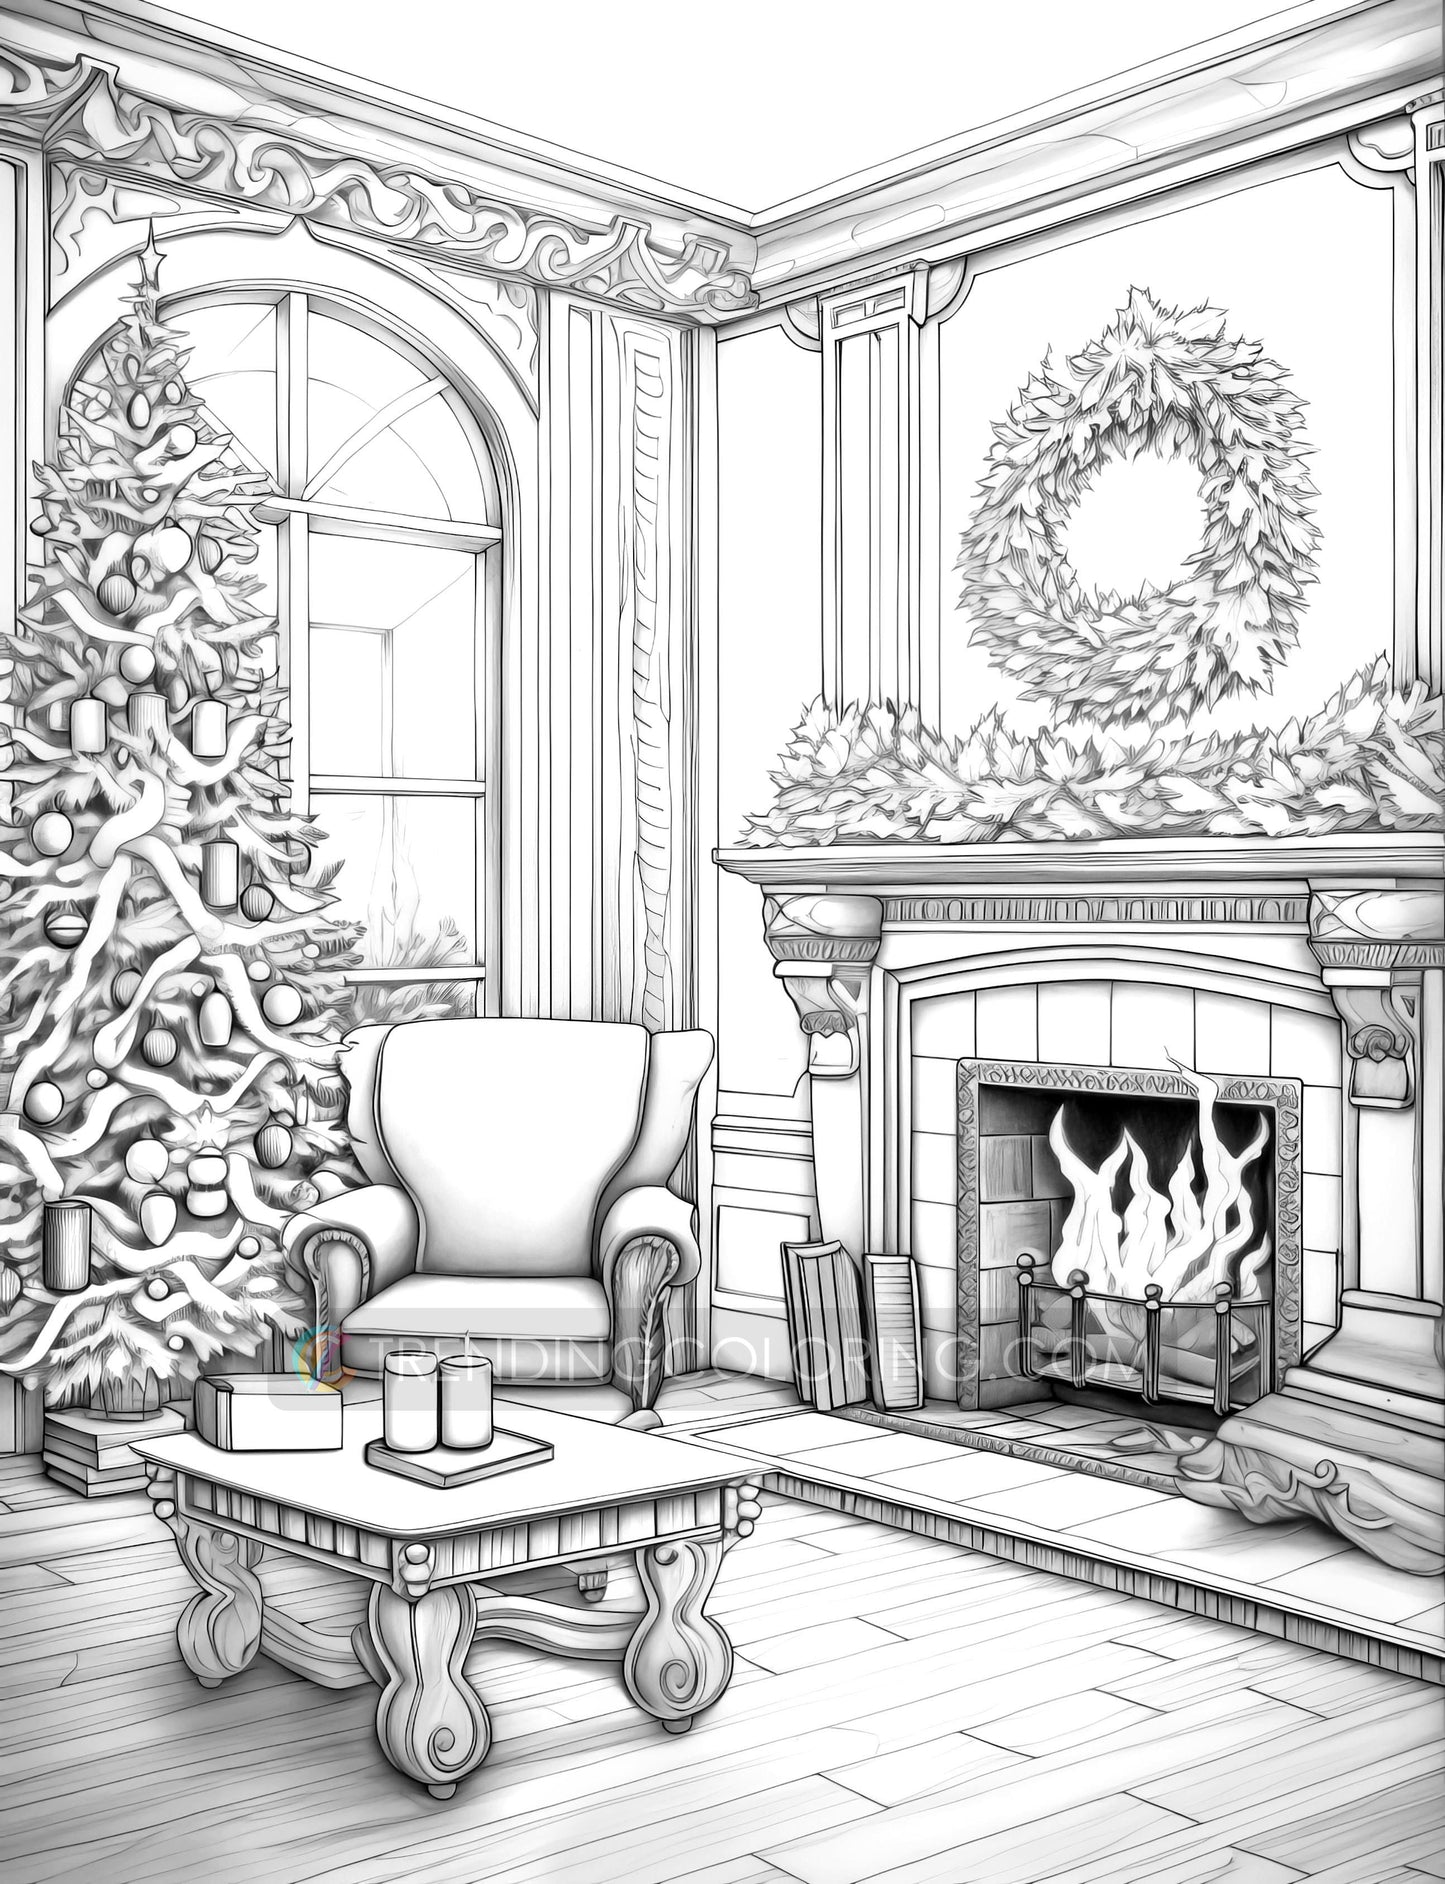 Free Christmas Coloring Pages - Instant Download Freepage - Printable PDF